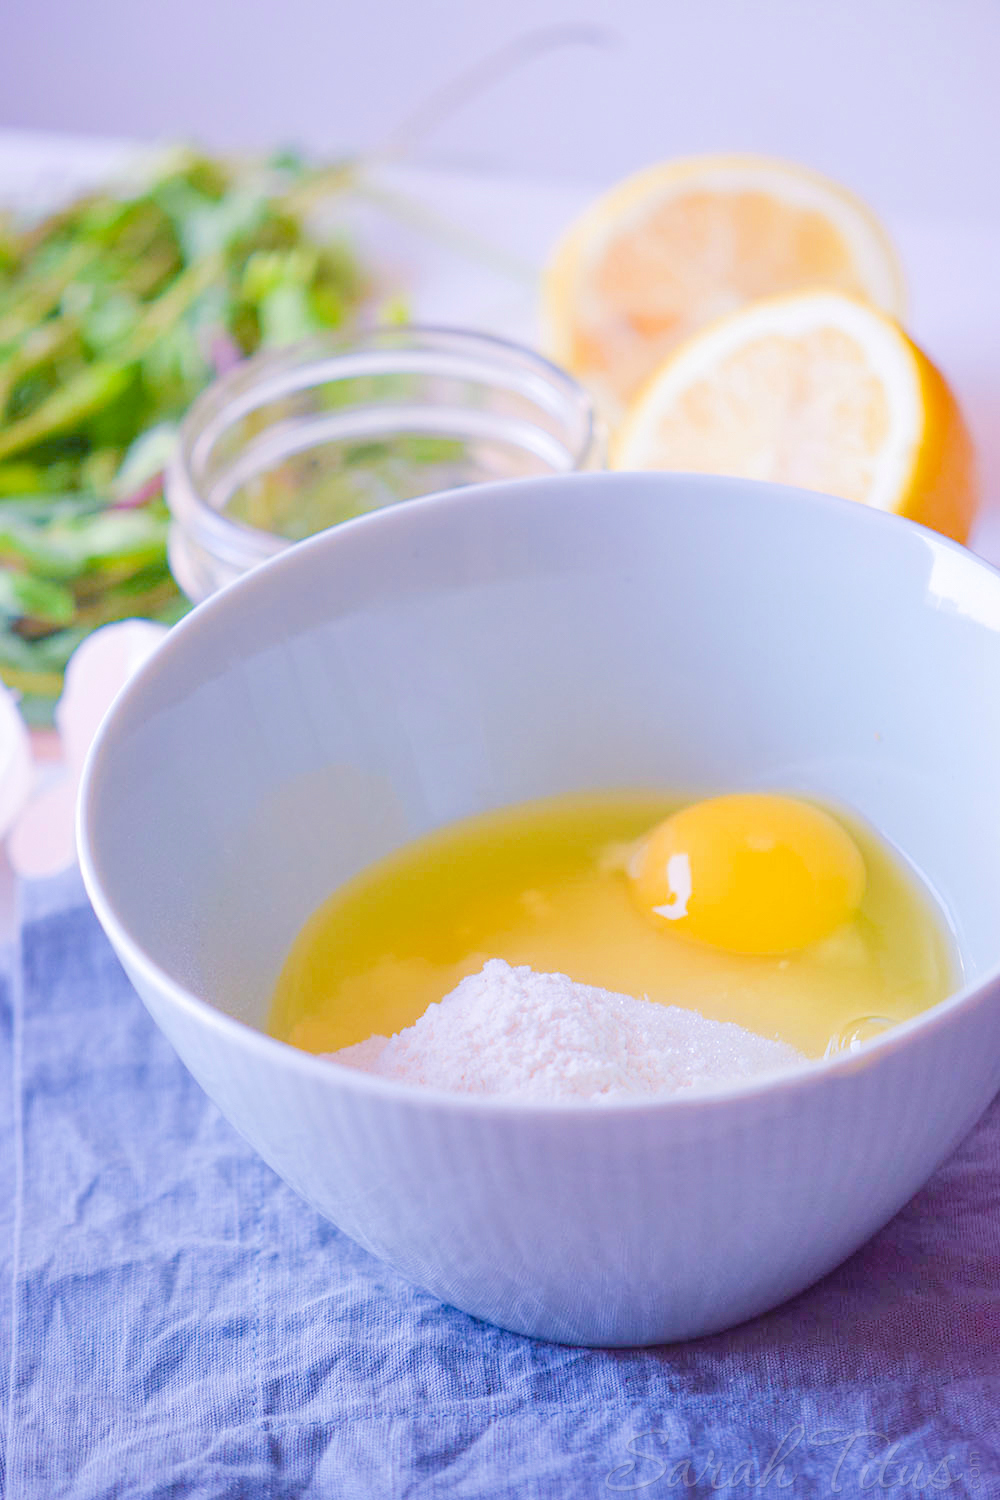 Egg and flour in white bowl